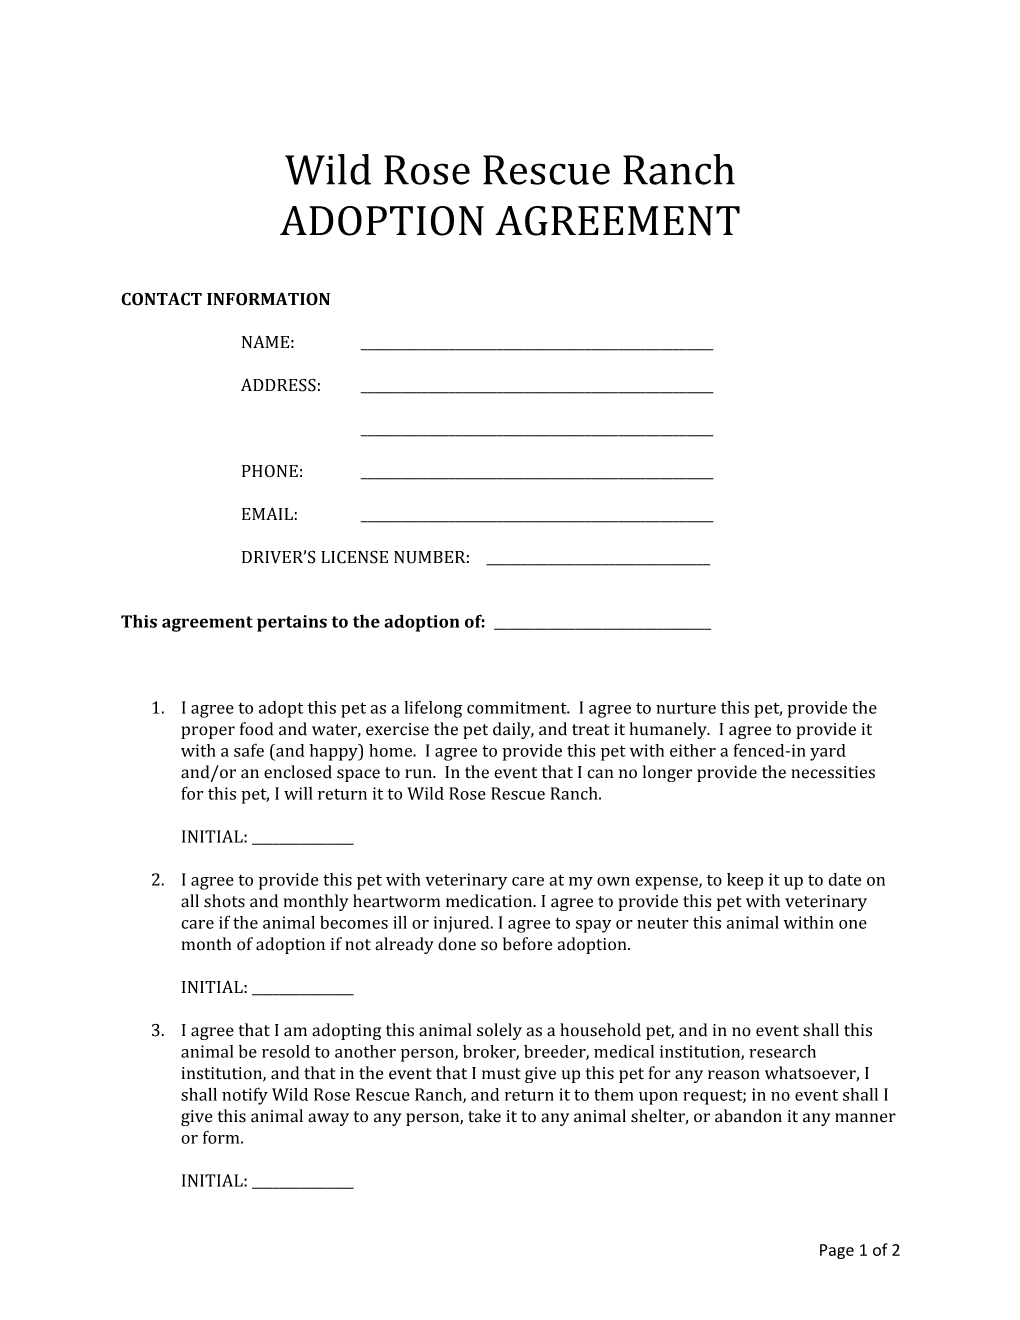 Wild Rose Rescue Ranch